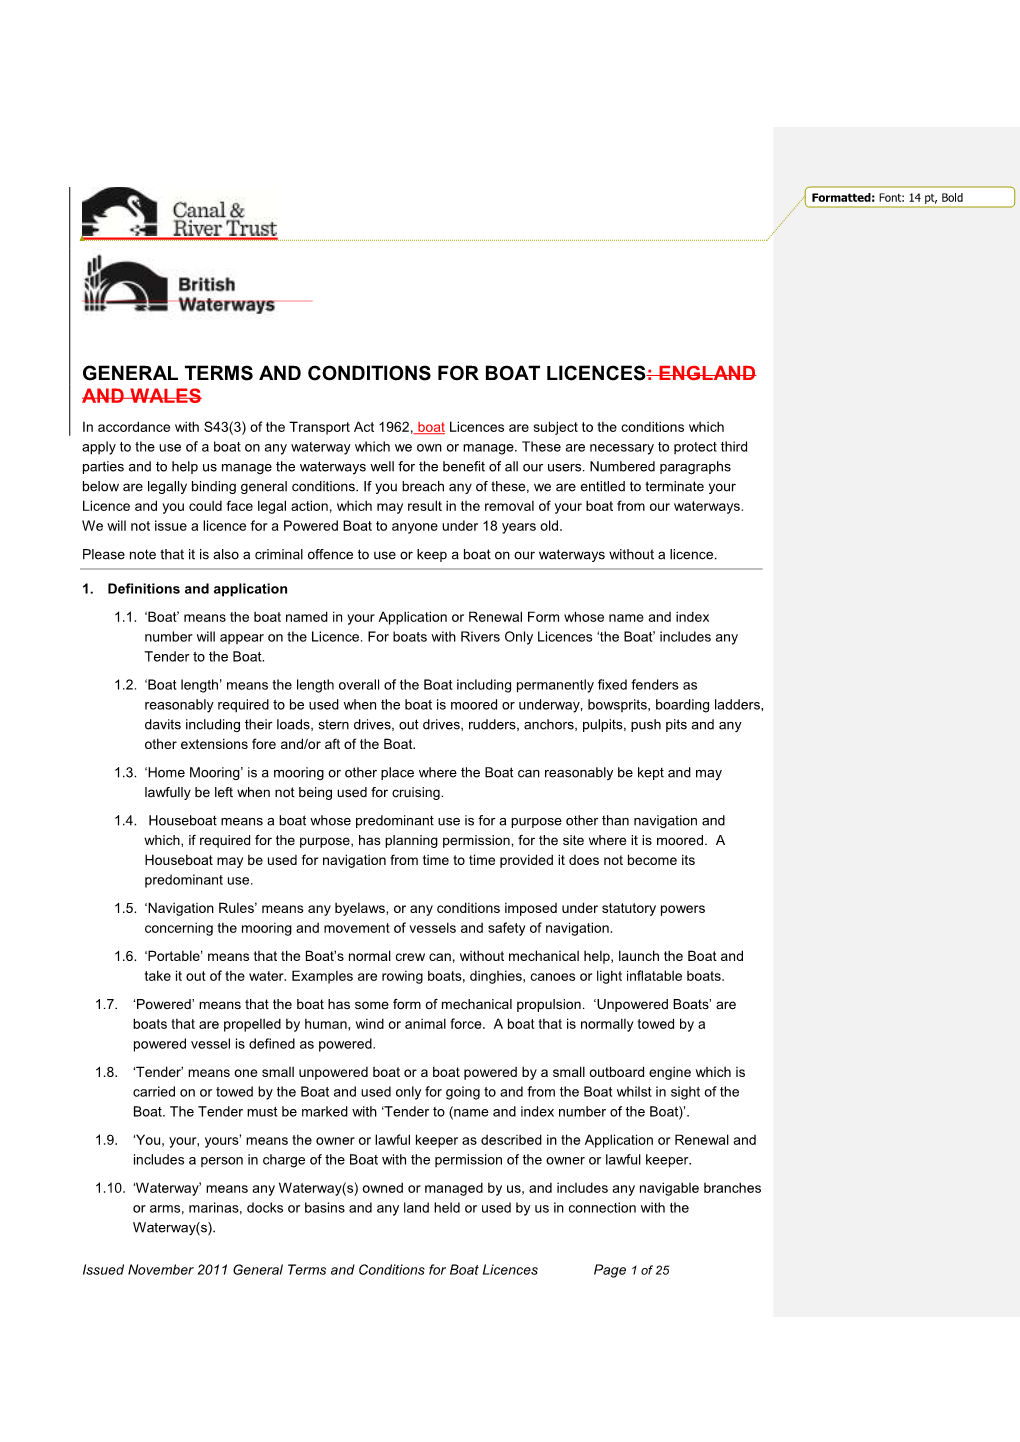 General Terms and Conditions for Boat Licences: England